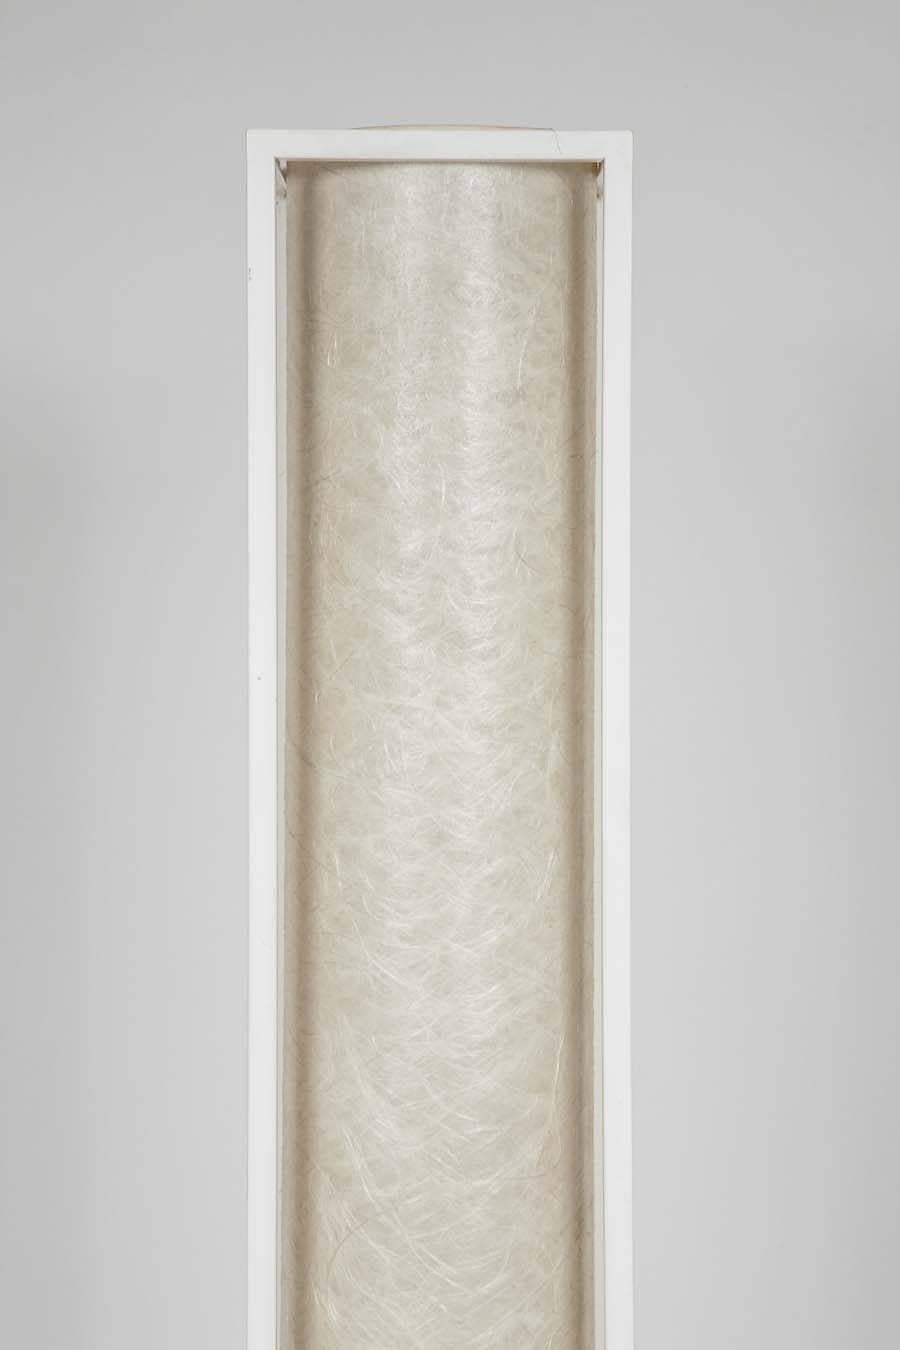 With its clean lines and Minimalist design this slim lamp fits easily into any space. Encased in the rectangular white metal frame a cylinder of natural paper shades the light source giving off a beautifully soft glow. 

.